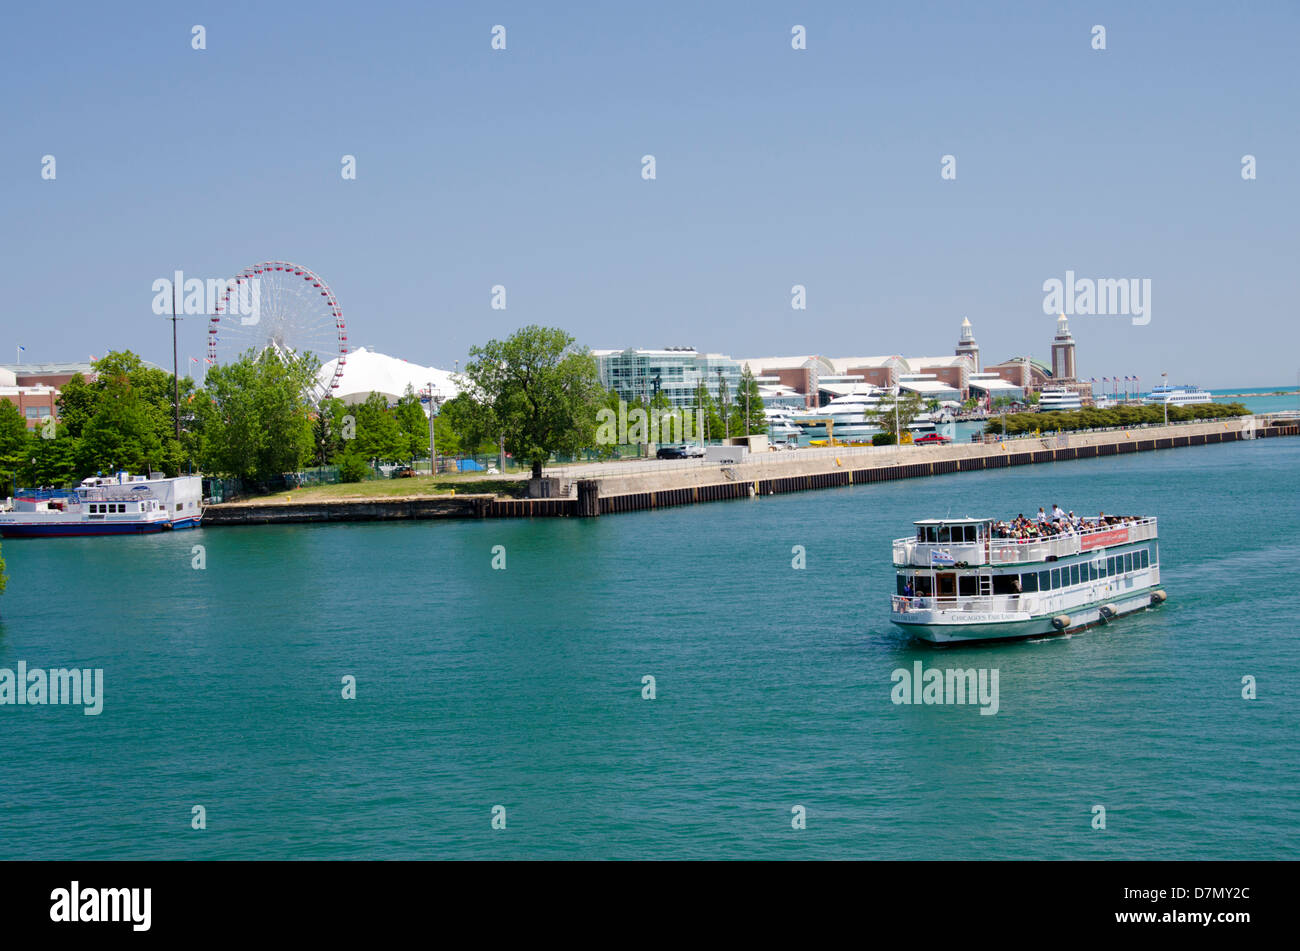 Illinois, Chicago. Sightseeing tour boat in front of Navy Pier along Lake Michigan. Stock Photo